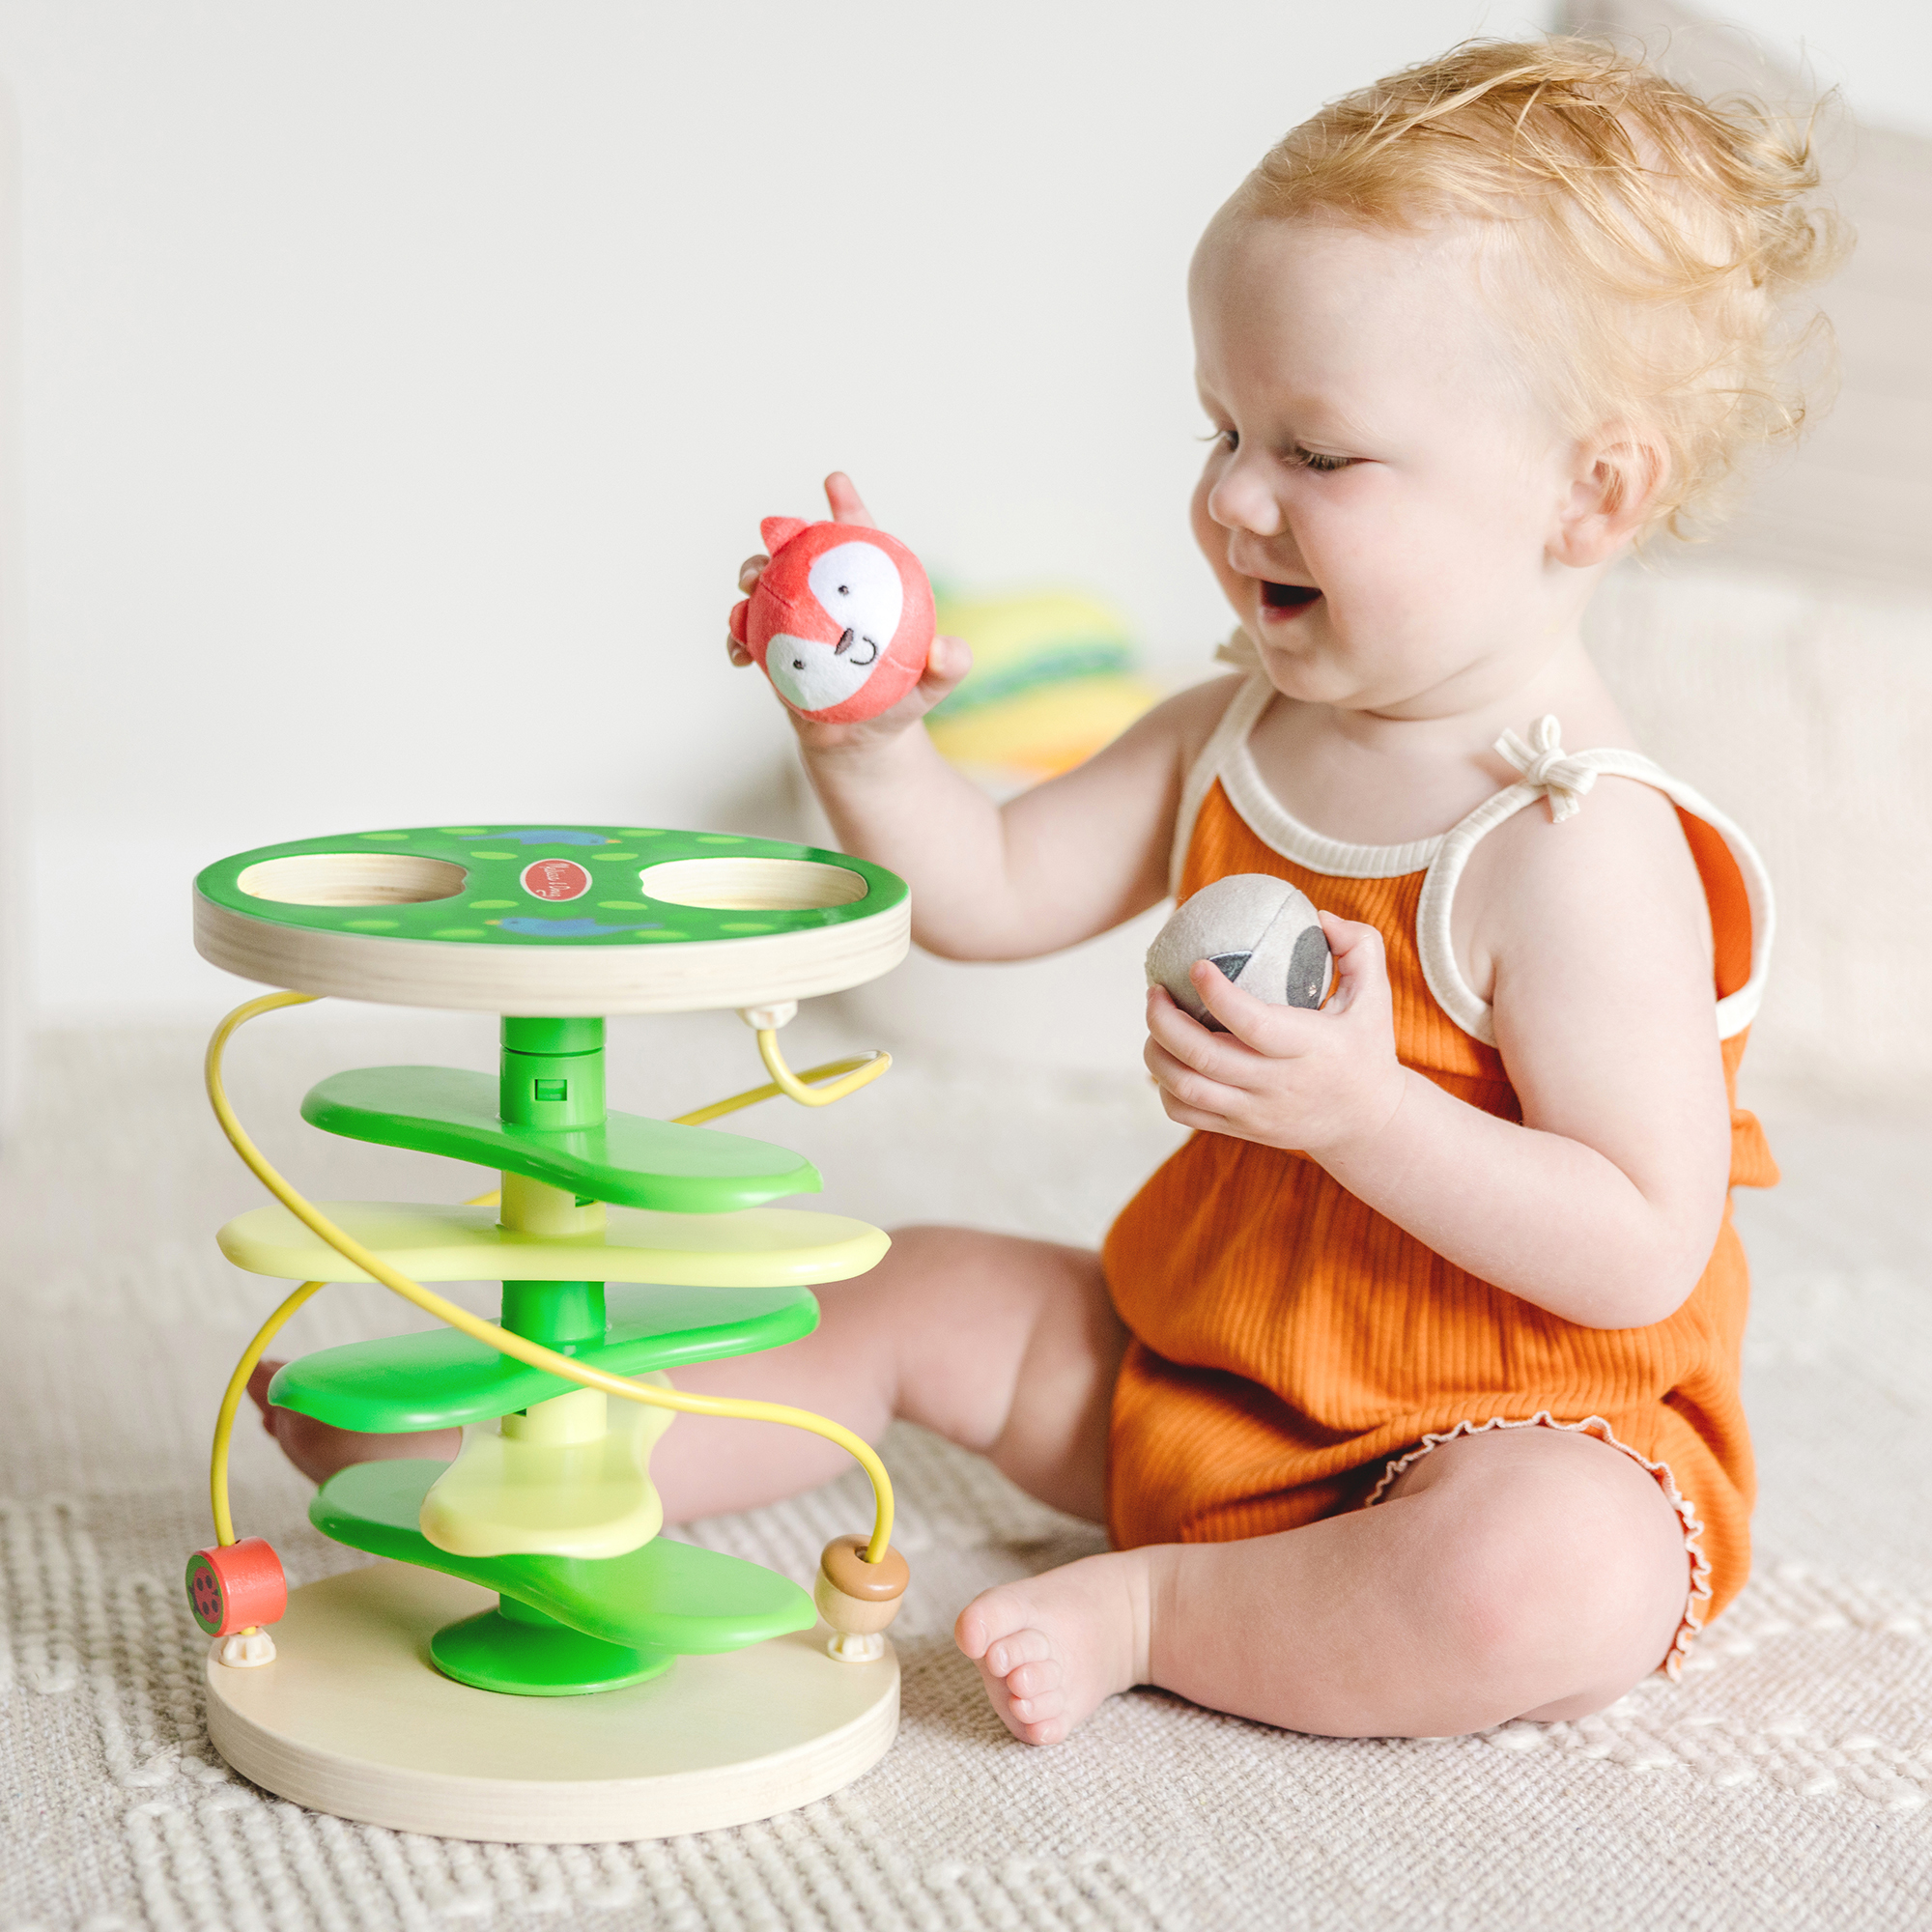 Melissa & Doug Rollables Tumble Tree image number null